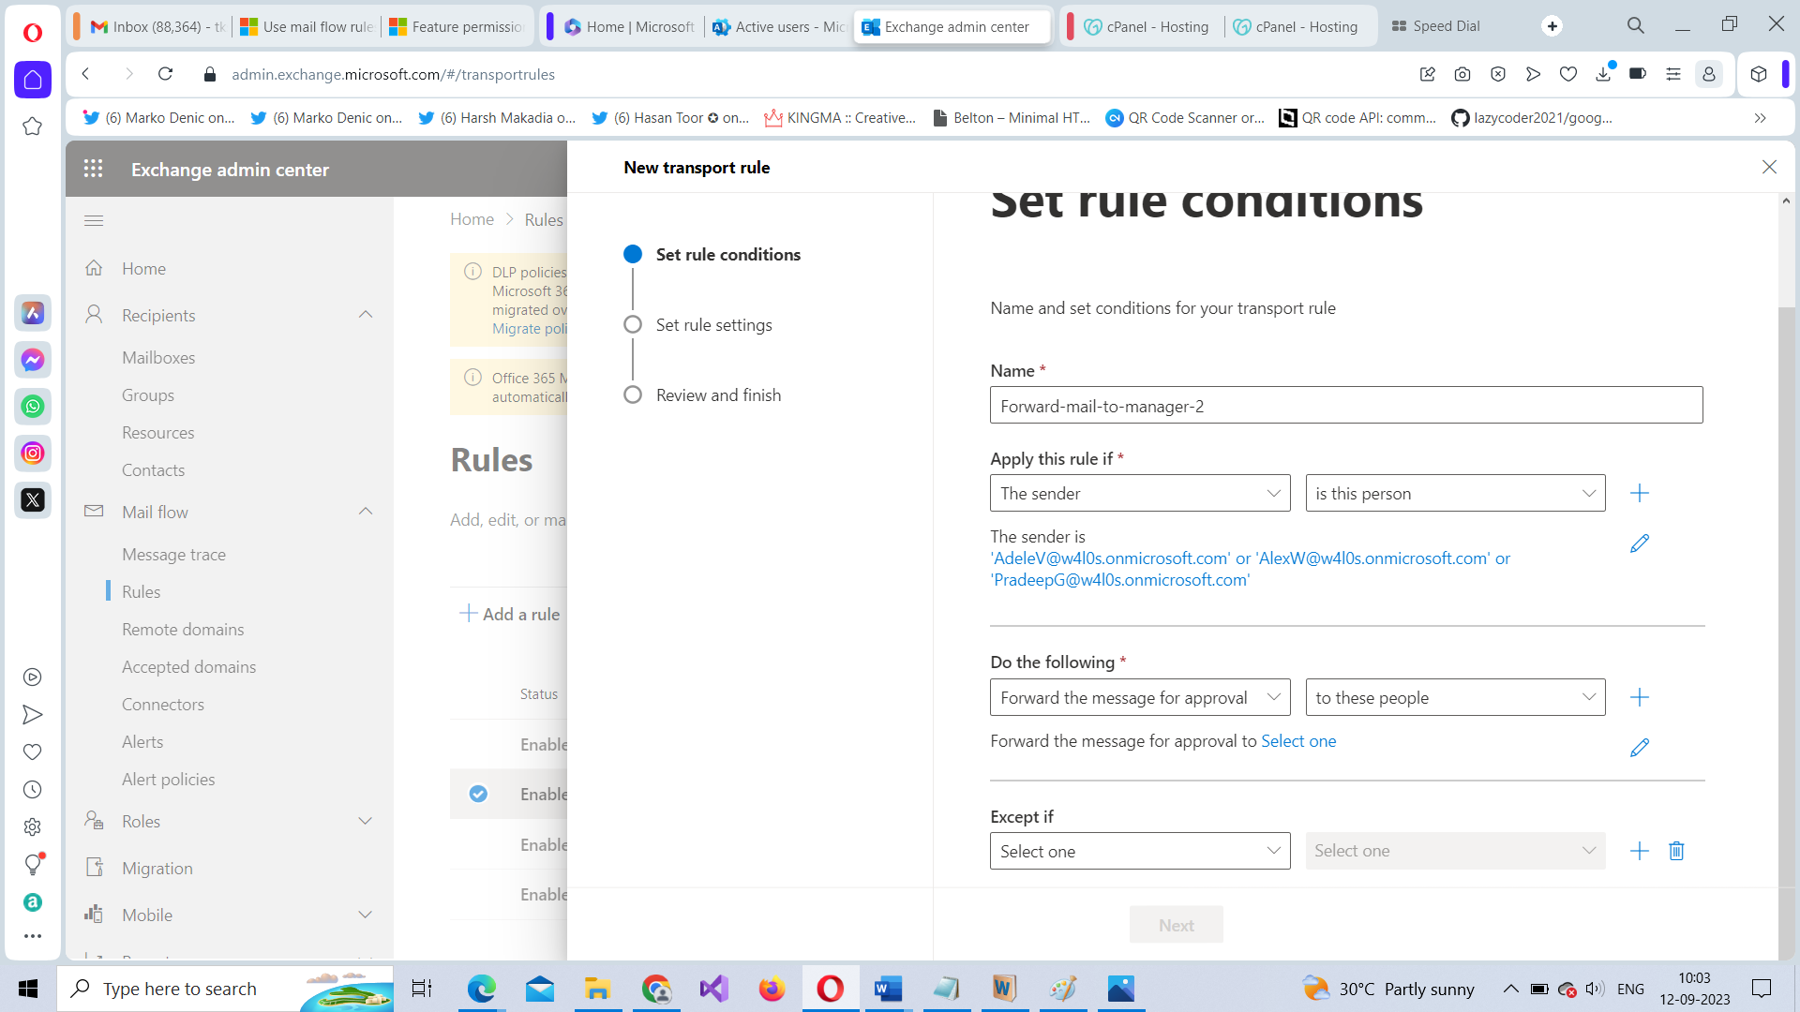 This screenshot shows how you can set the actions for the Microsoft 365 mail flow rule in the Microsoft 365 Exchange admin center. The name of the rule is Forward-mail-to-manager-2. The conditions shown include: Apply this rule if the sender is this person and Forward the message for approval to these people.